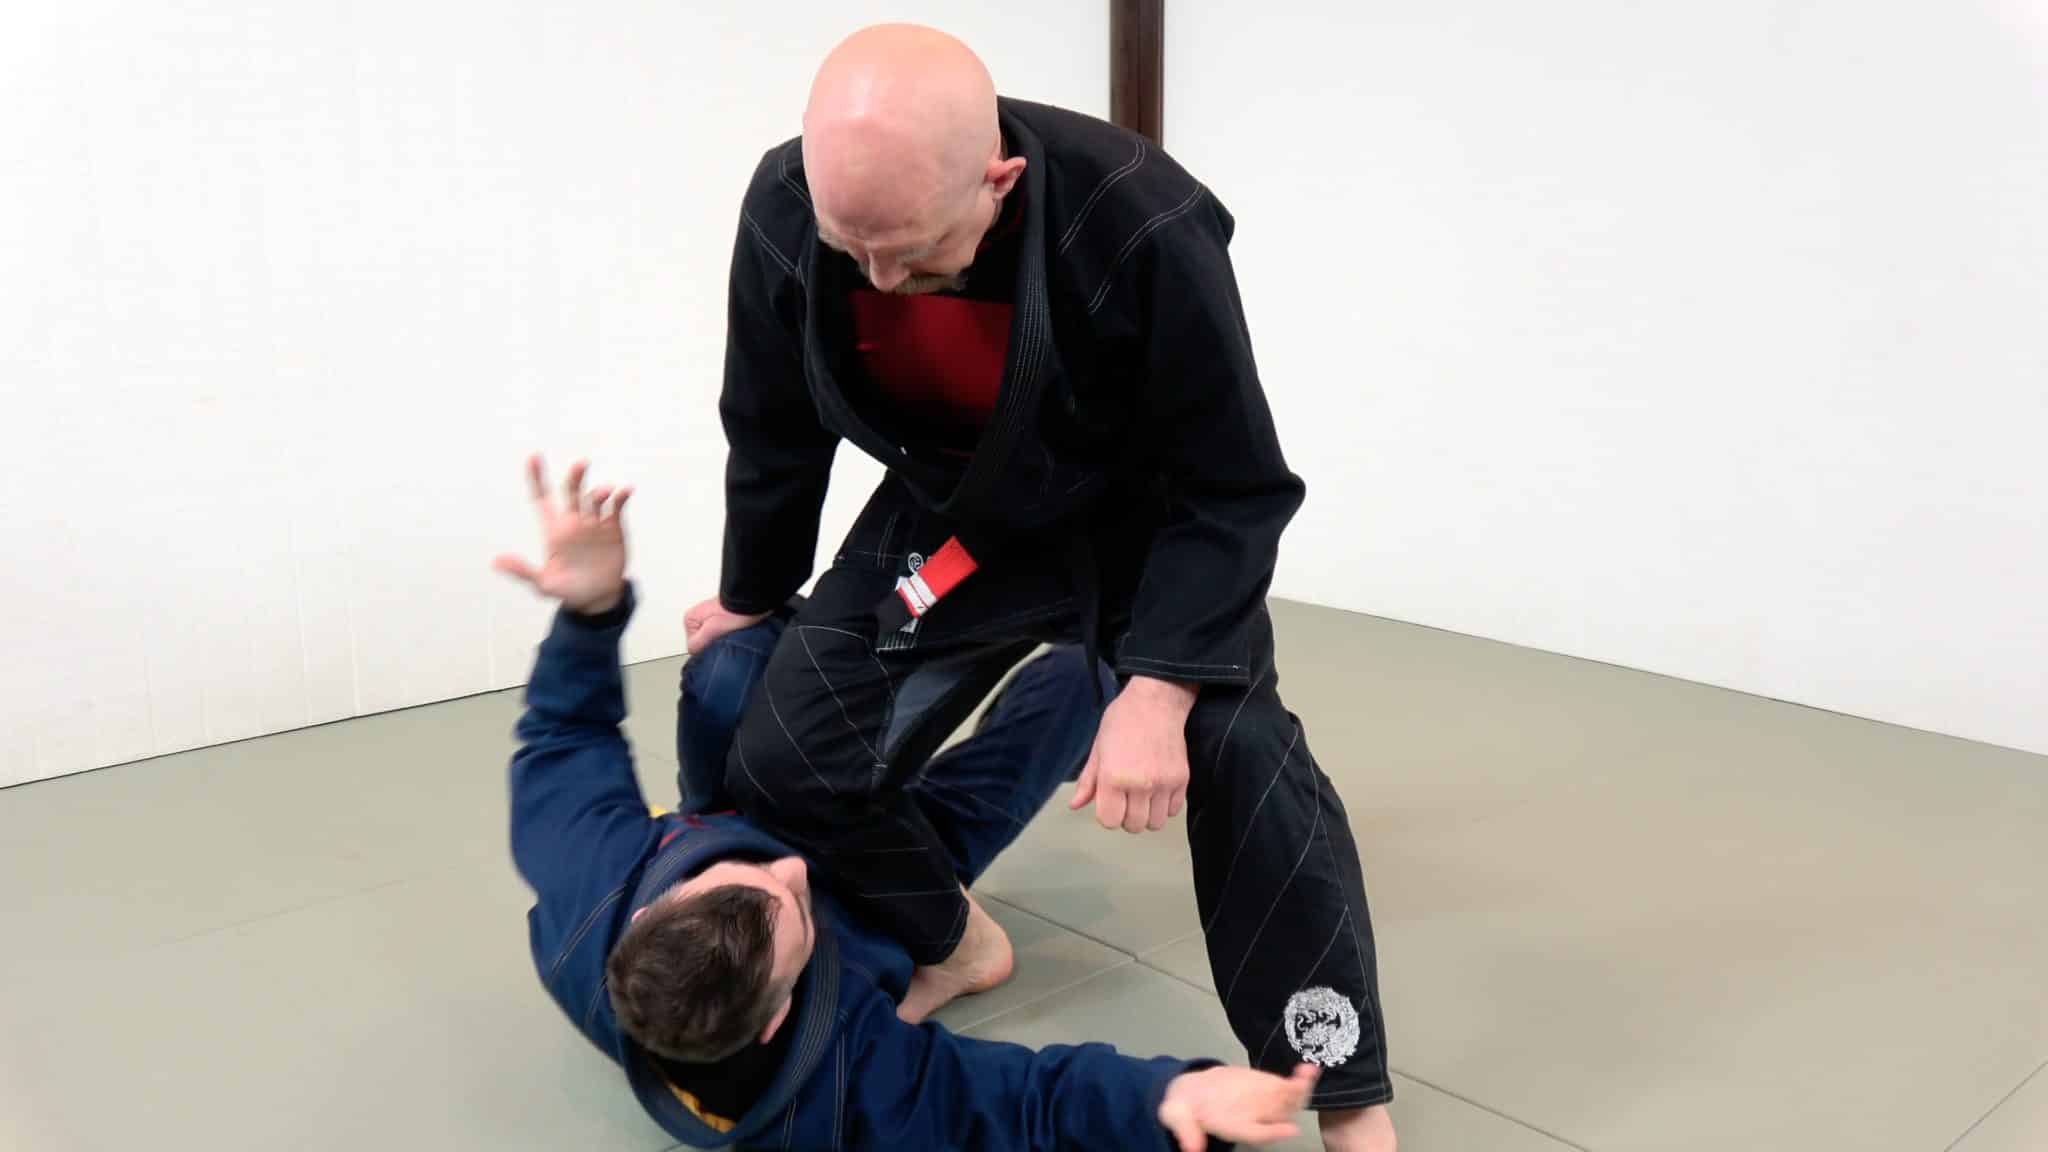 ...Allows space for the guard passer to get to knee mount